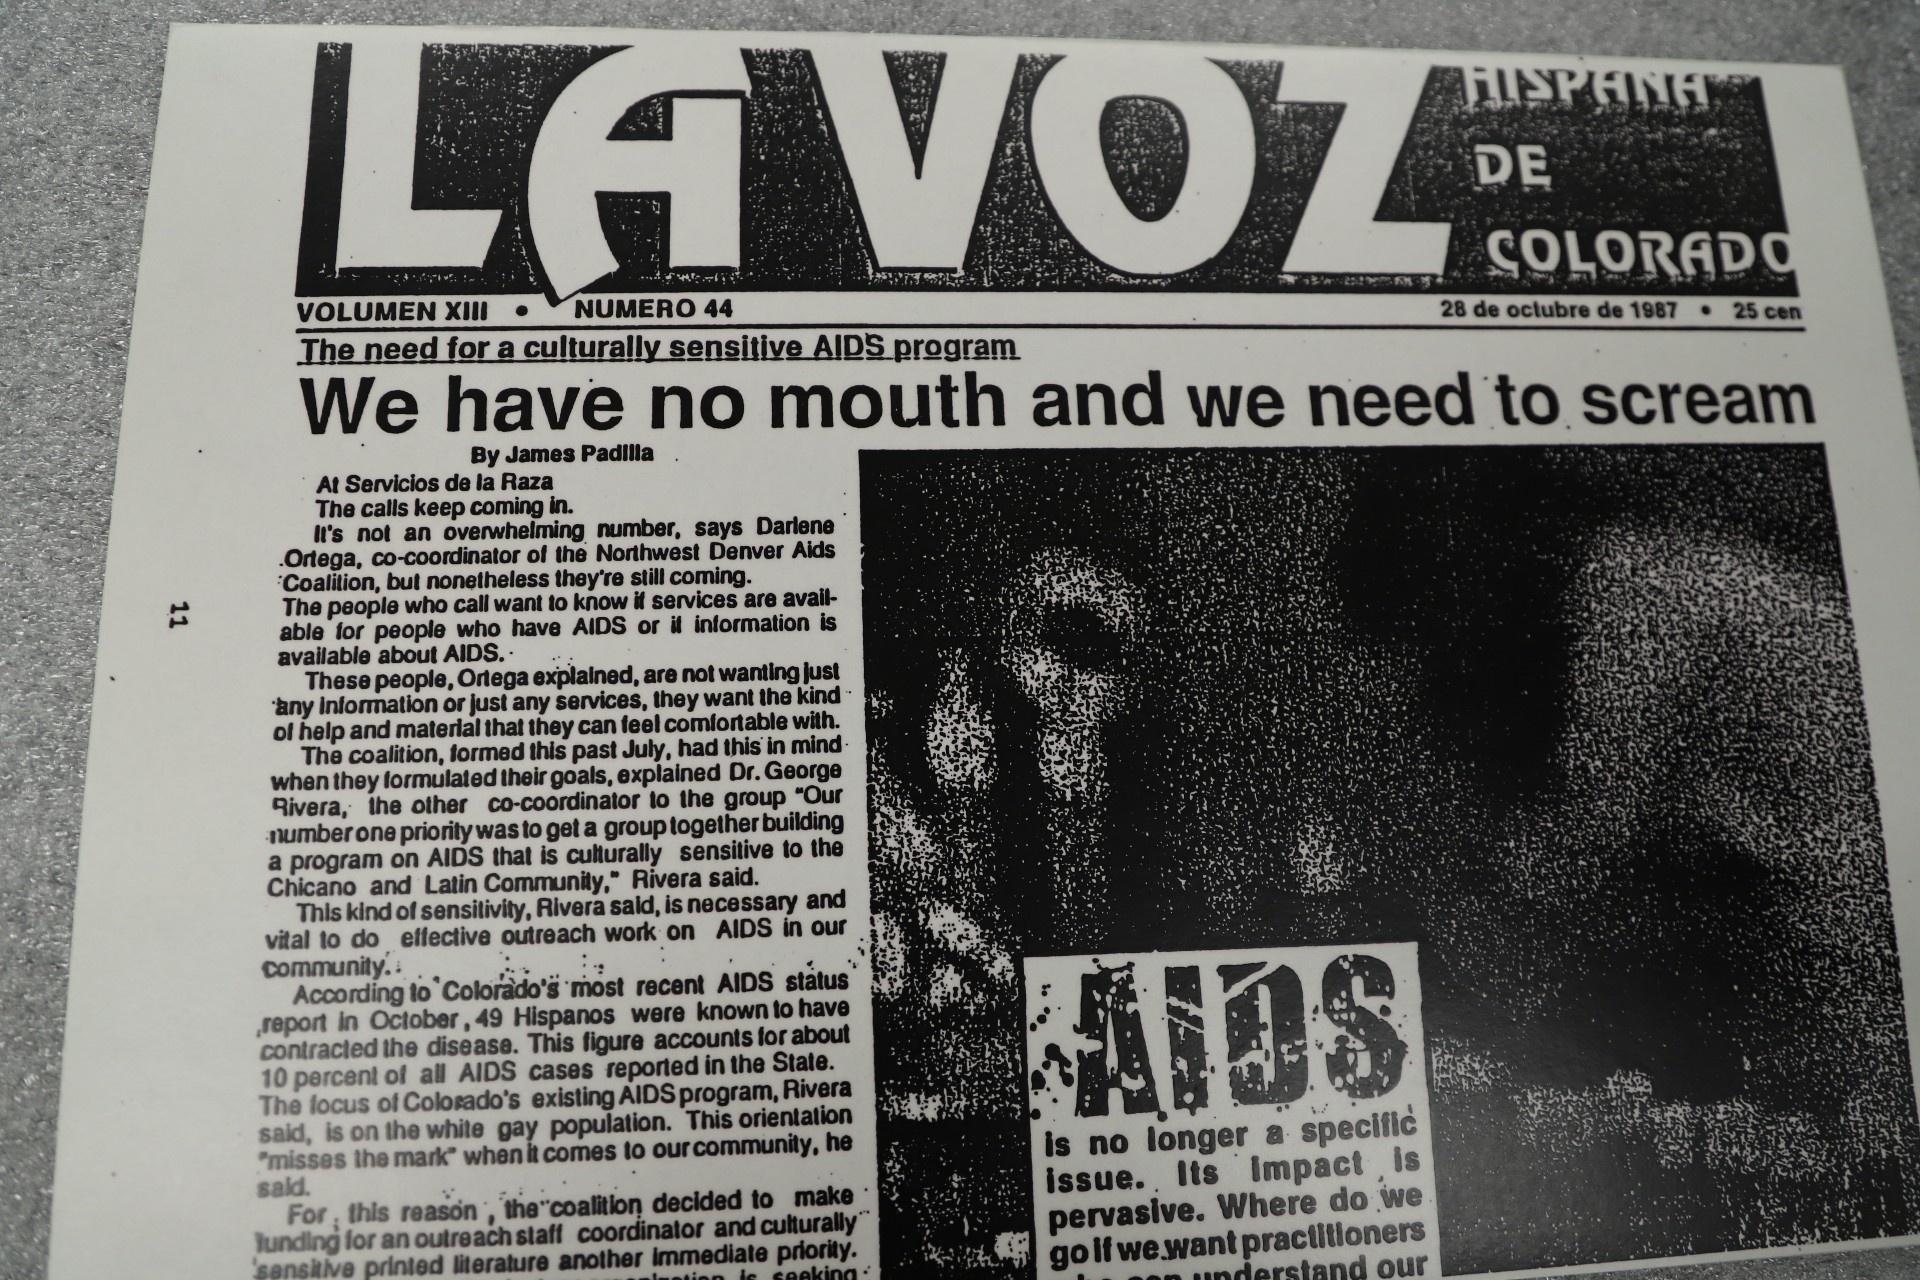 A 1987 issue of La Voz with the headline "We have no mouth and we need to scream"